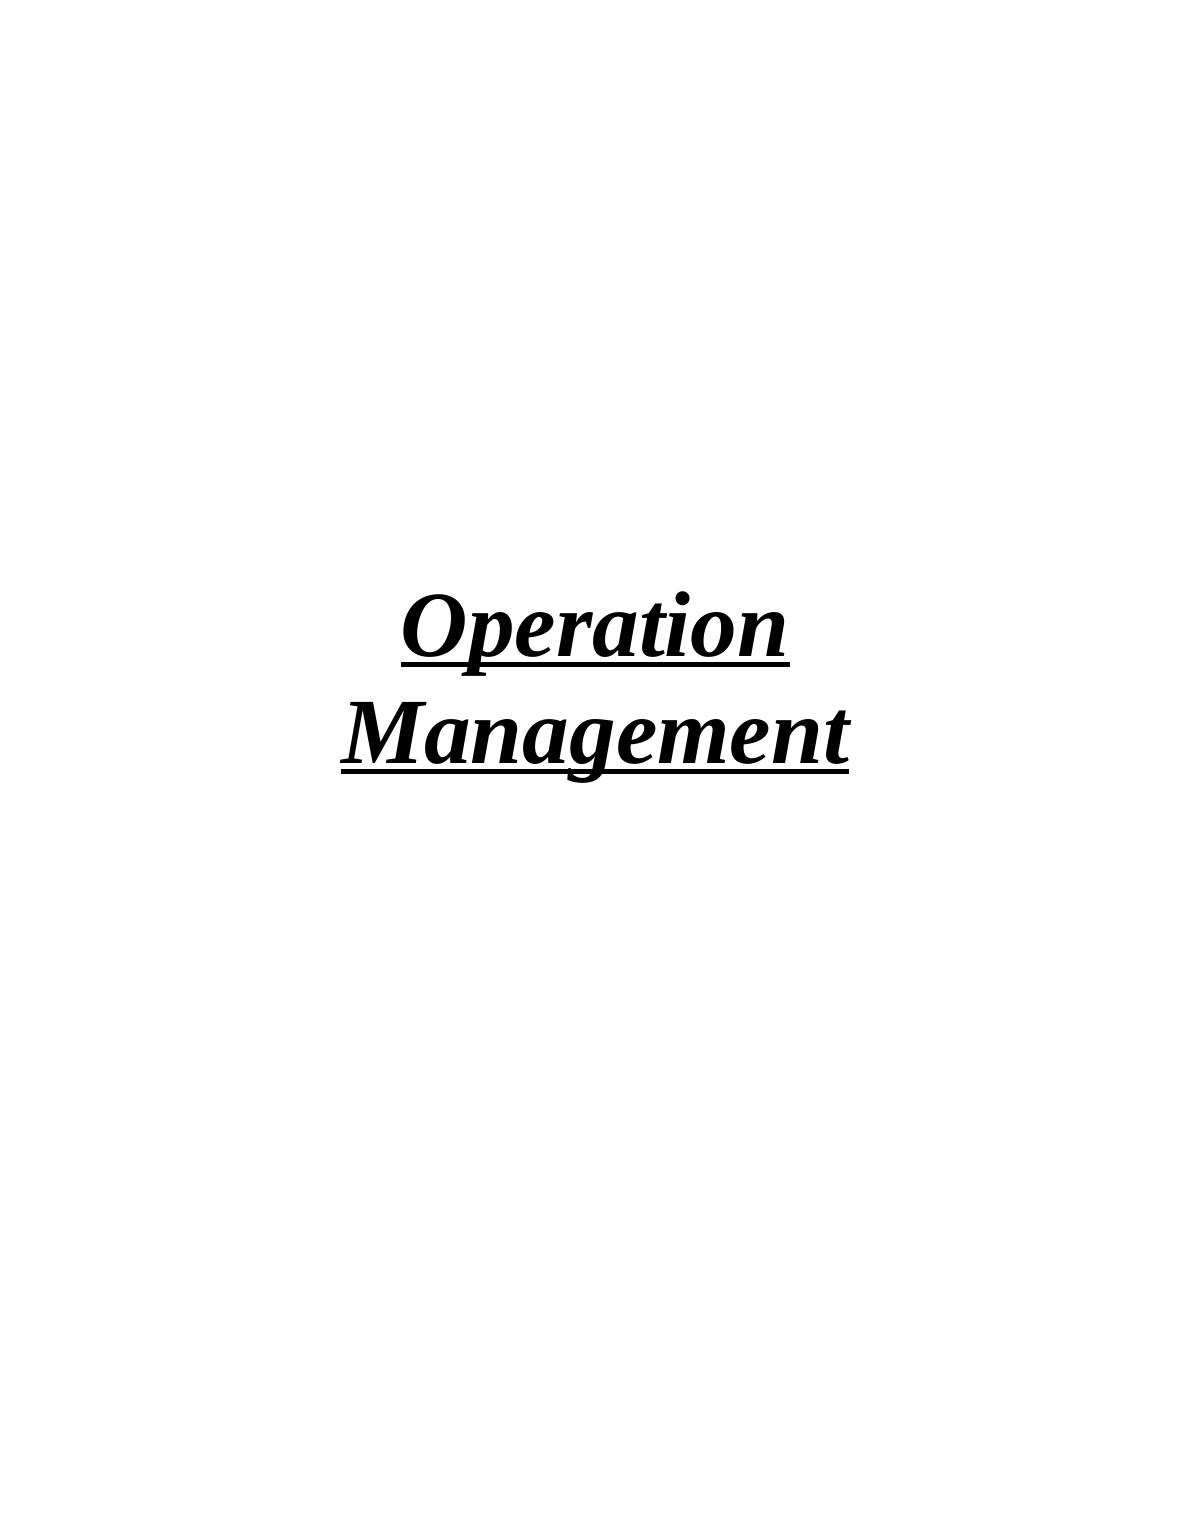 Operation Management assignment PDF : Marks and Spencer_1